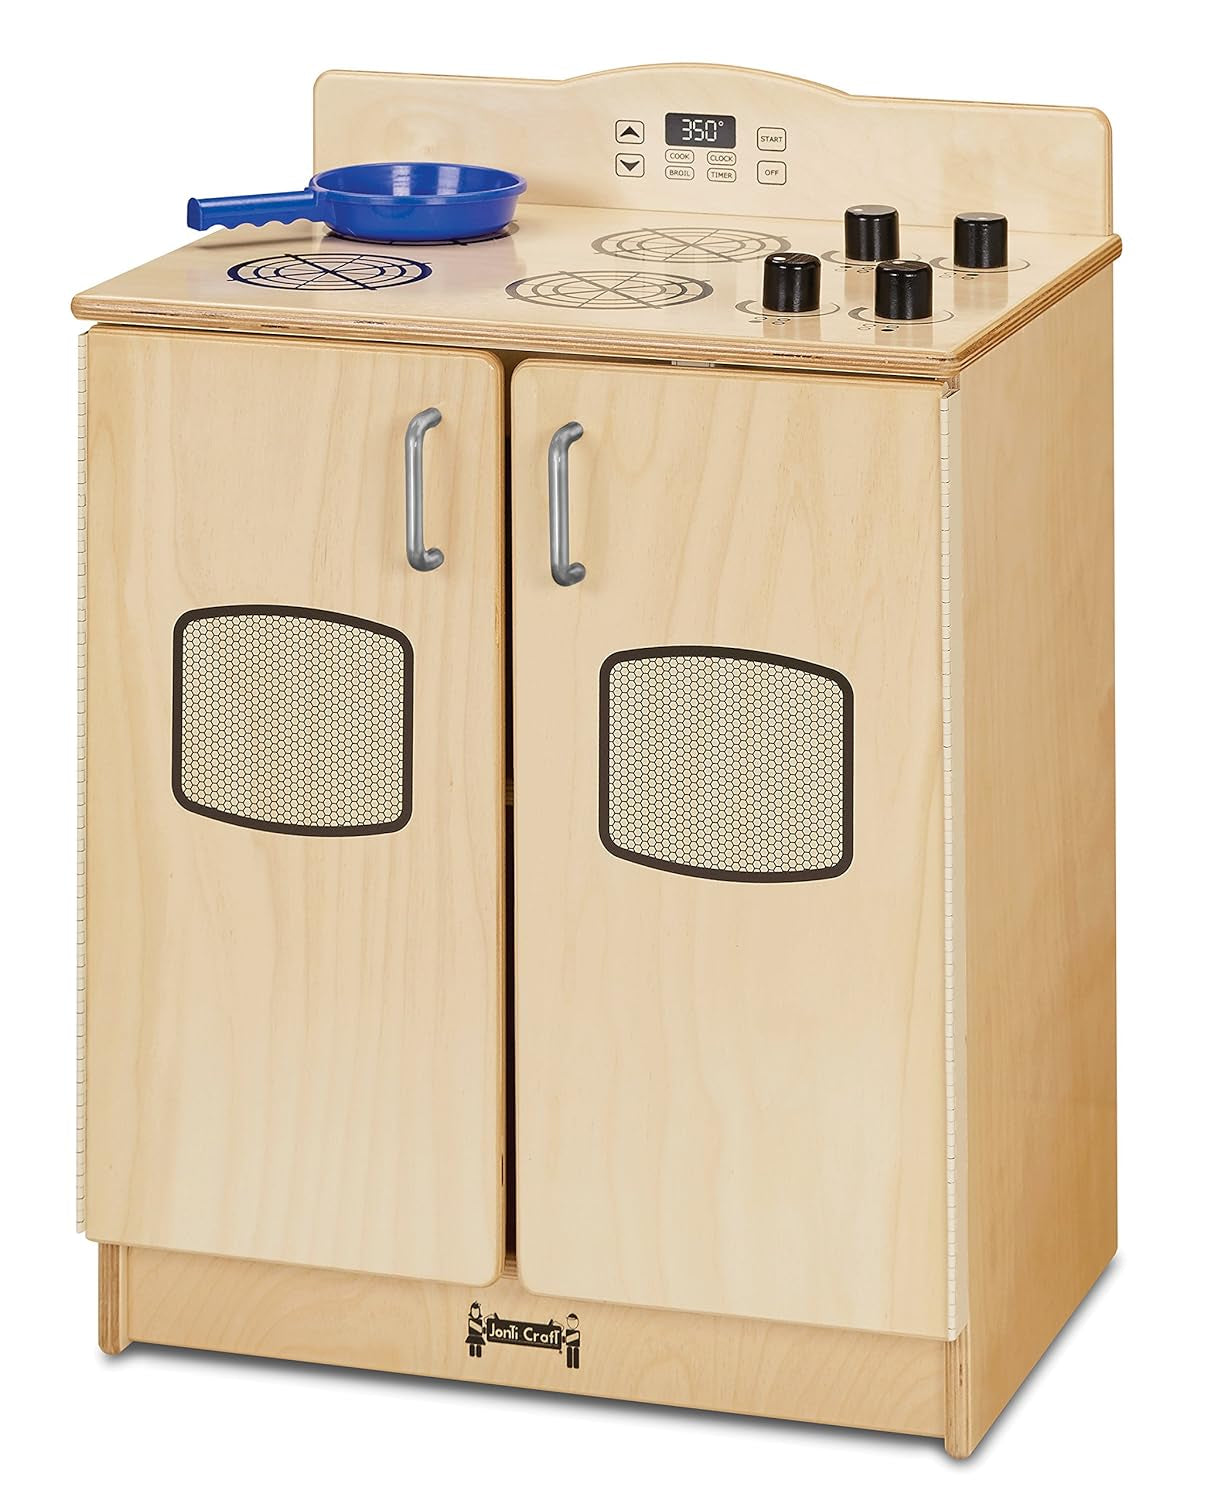 2411JC Culinary Creations Play Kitchen, 35 X 80 X 15 Inches, Natural Wood, 4 Piece Set